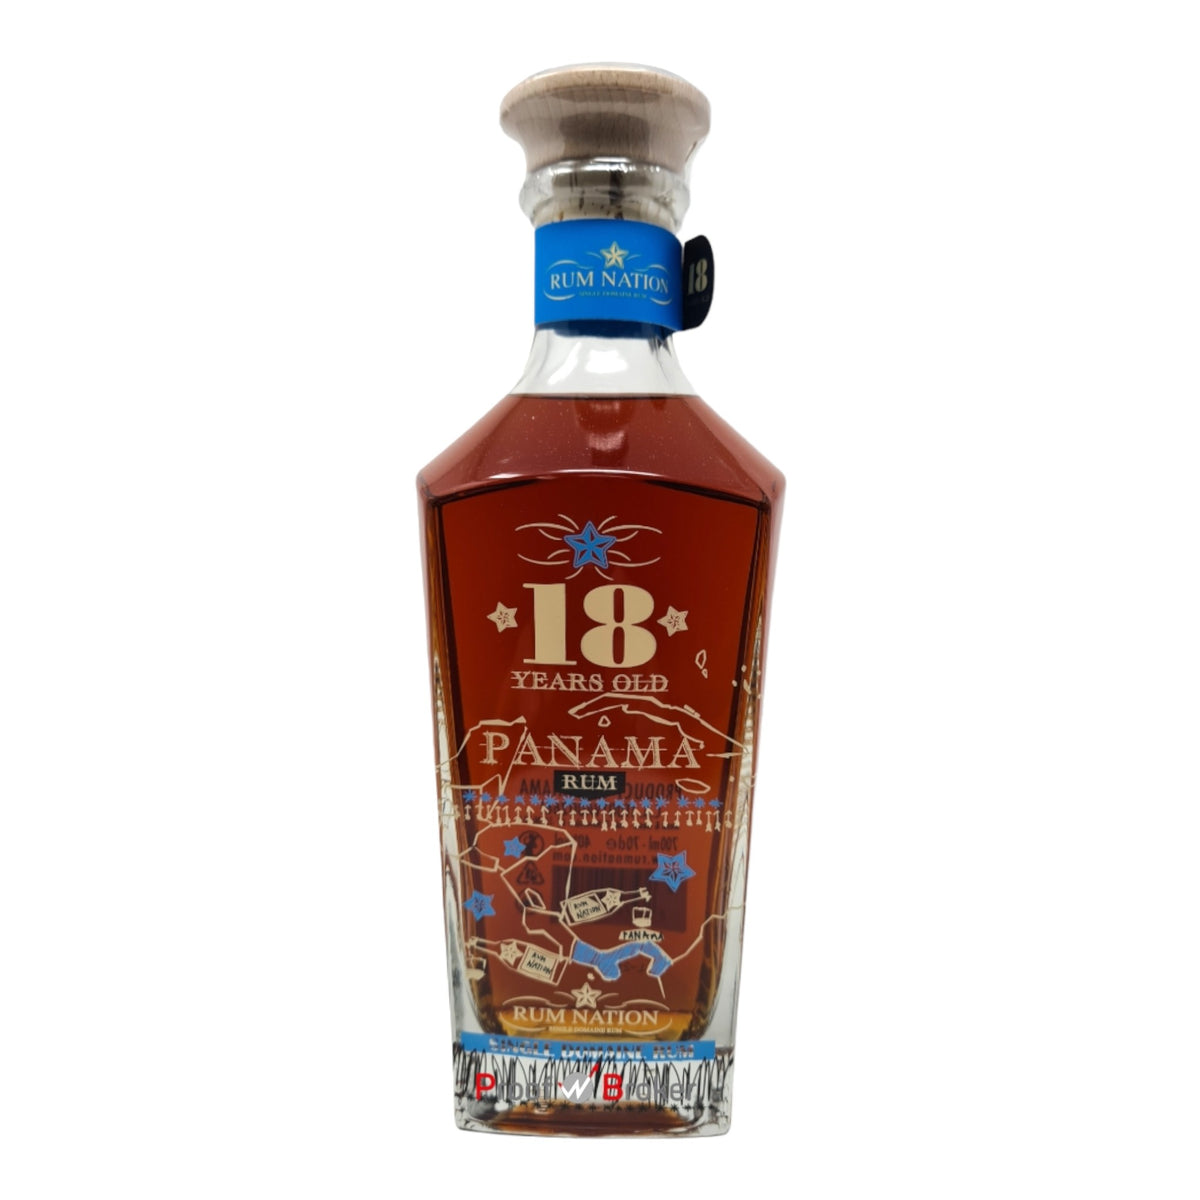 Rum Nation Panama 18 Years Old Decanter 0,7 L